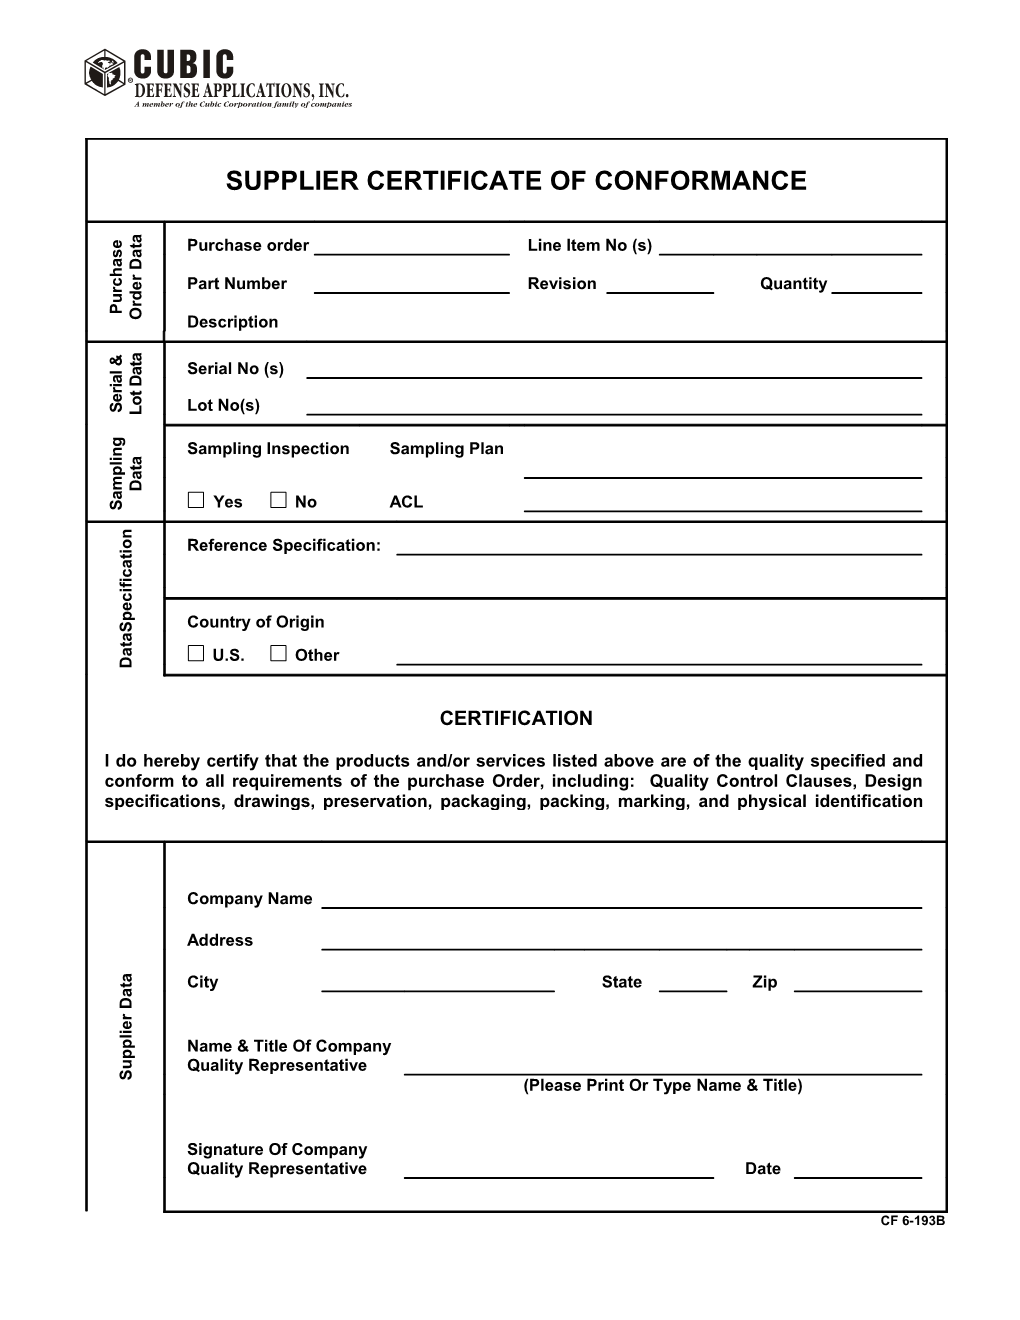 Supplier Certificate Of Conformance